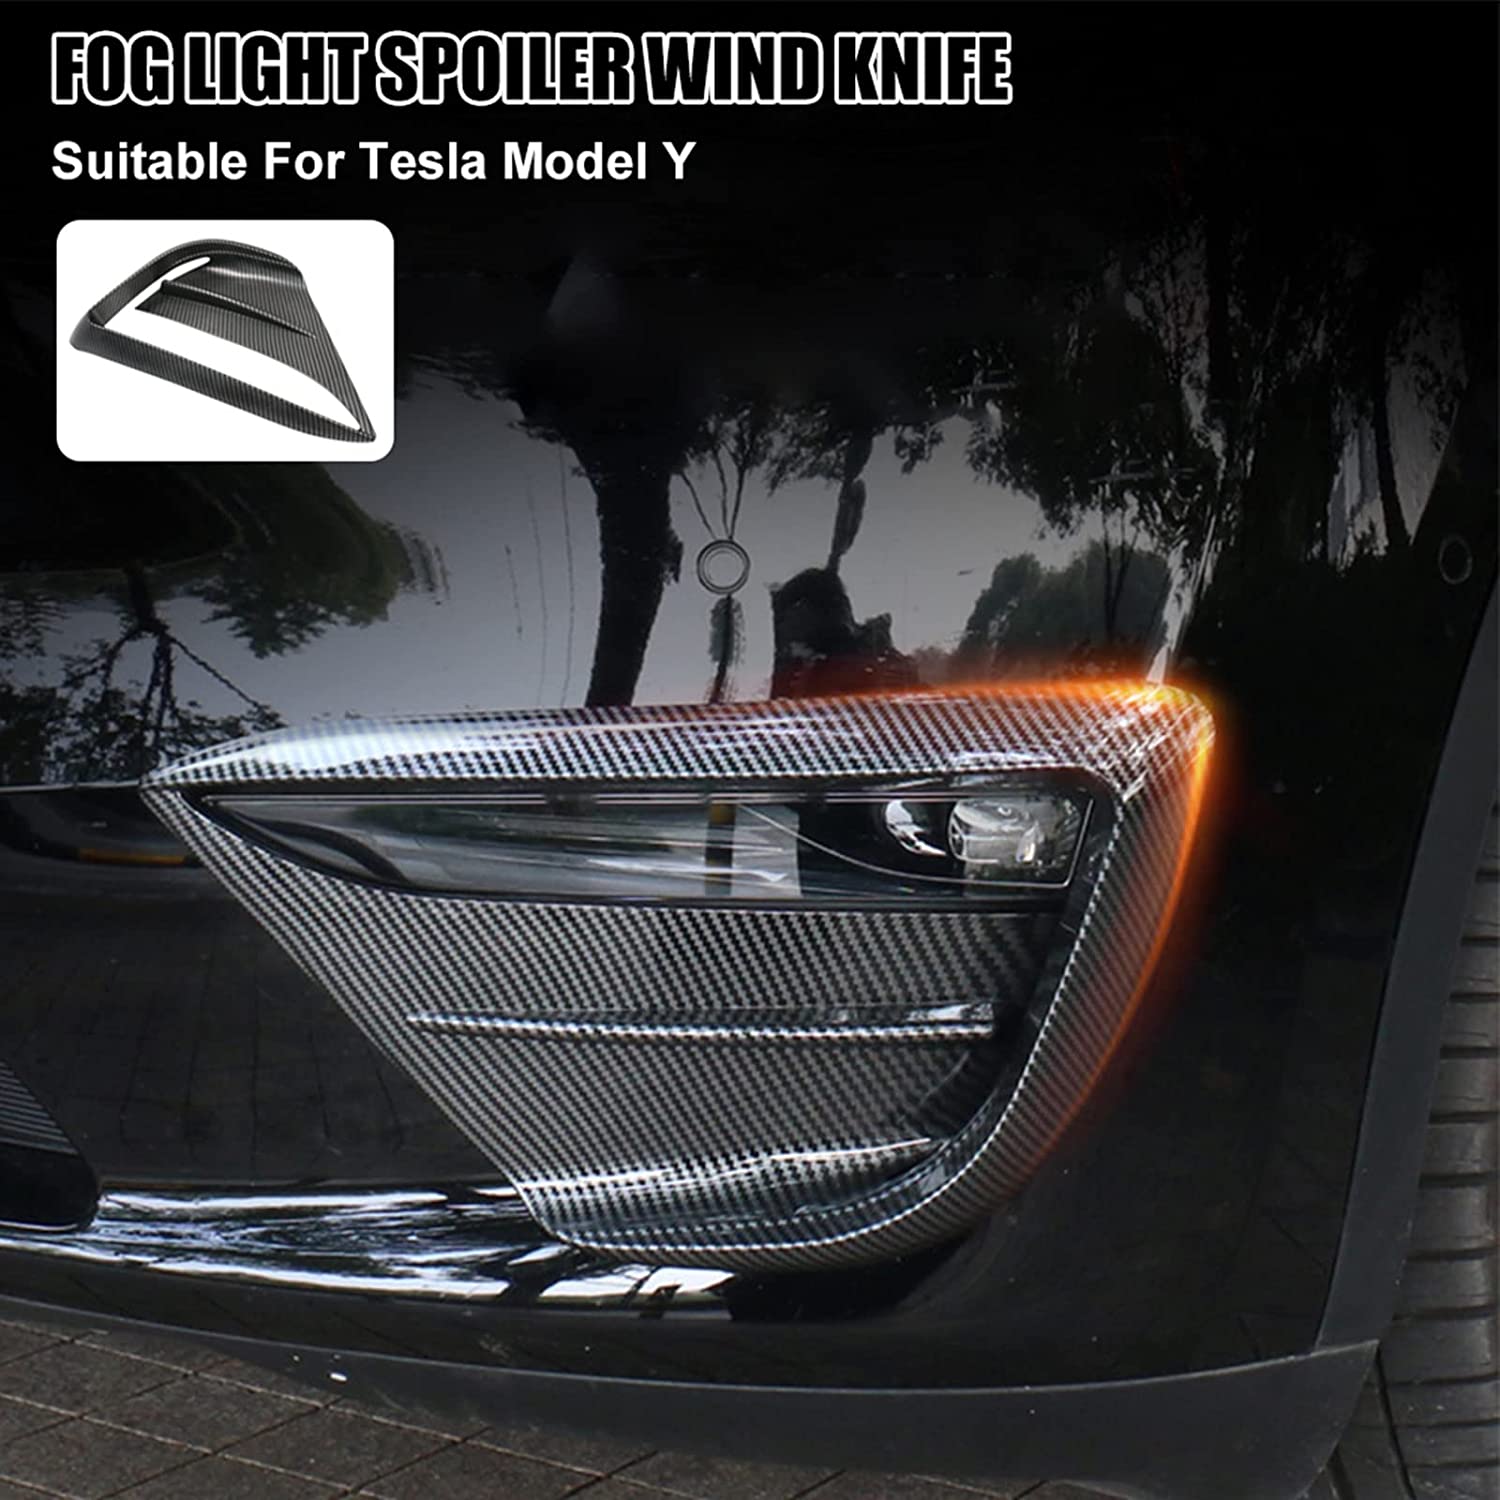  Bumper Grille vinyl decal sticker - triangle style, Fits Tesla  Model 3 & Model Y, Popular exerior accessory in 2022 2023